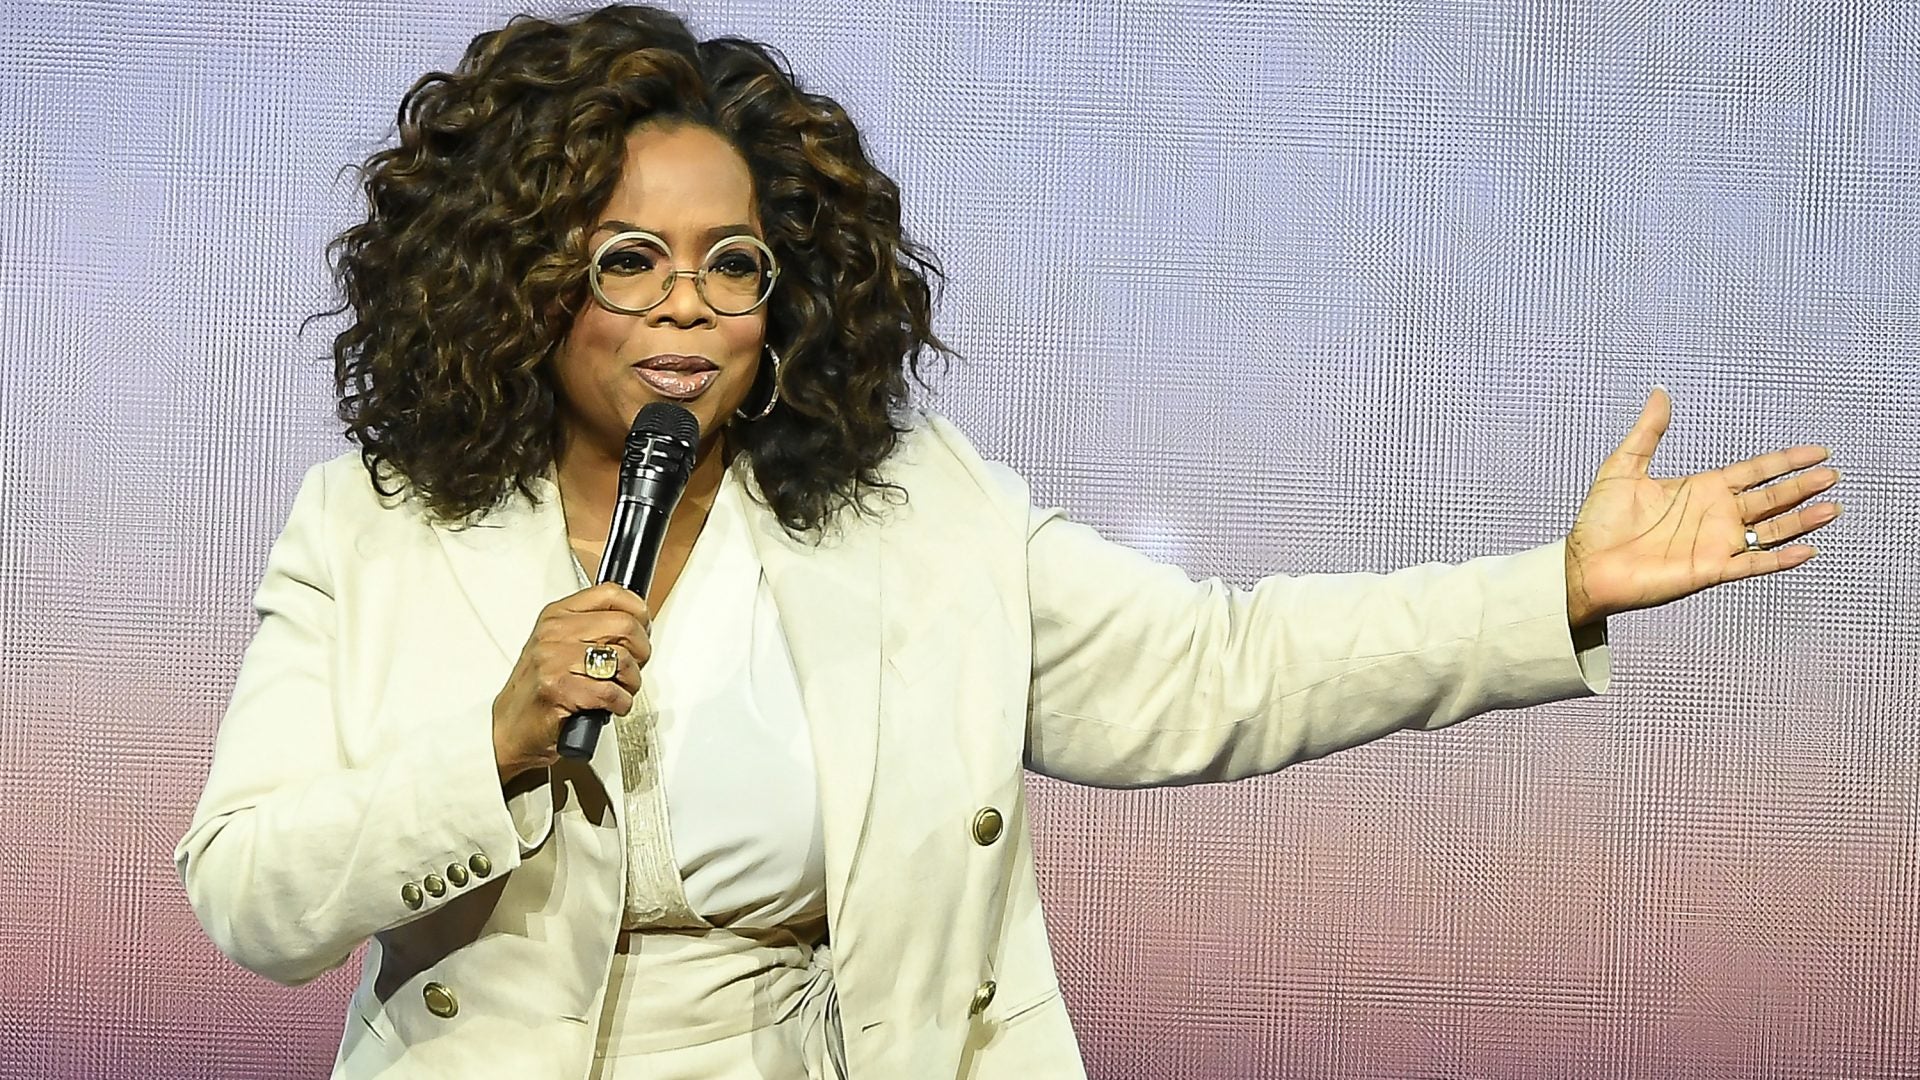 Oprah Winfrey Tells Harvard Graduate: 'You Wear The Crown Your Ancestors Made For You'